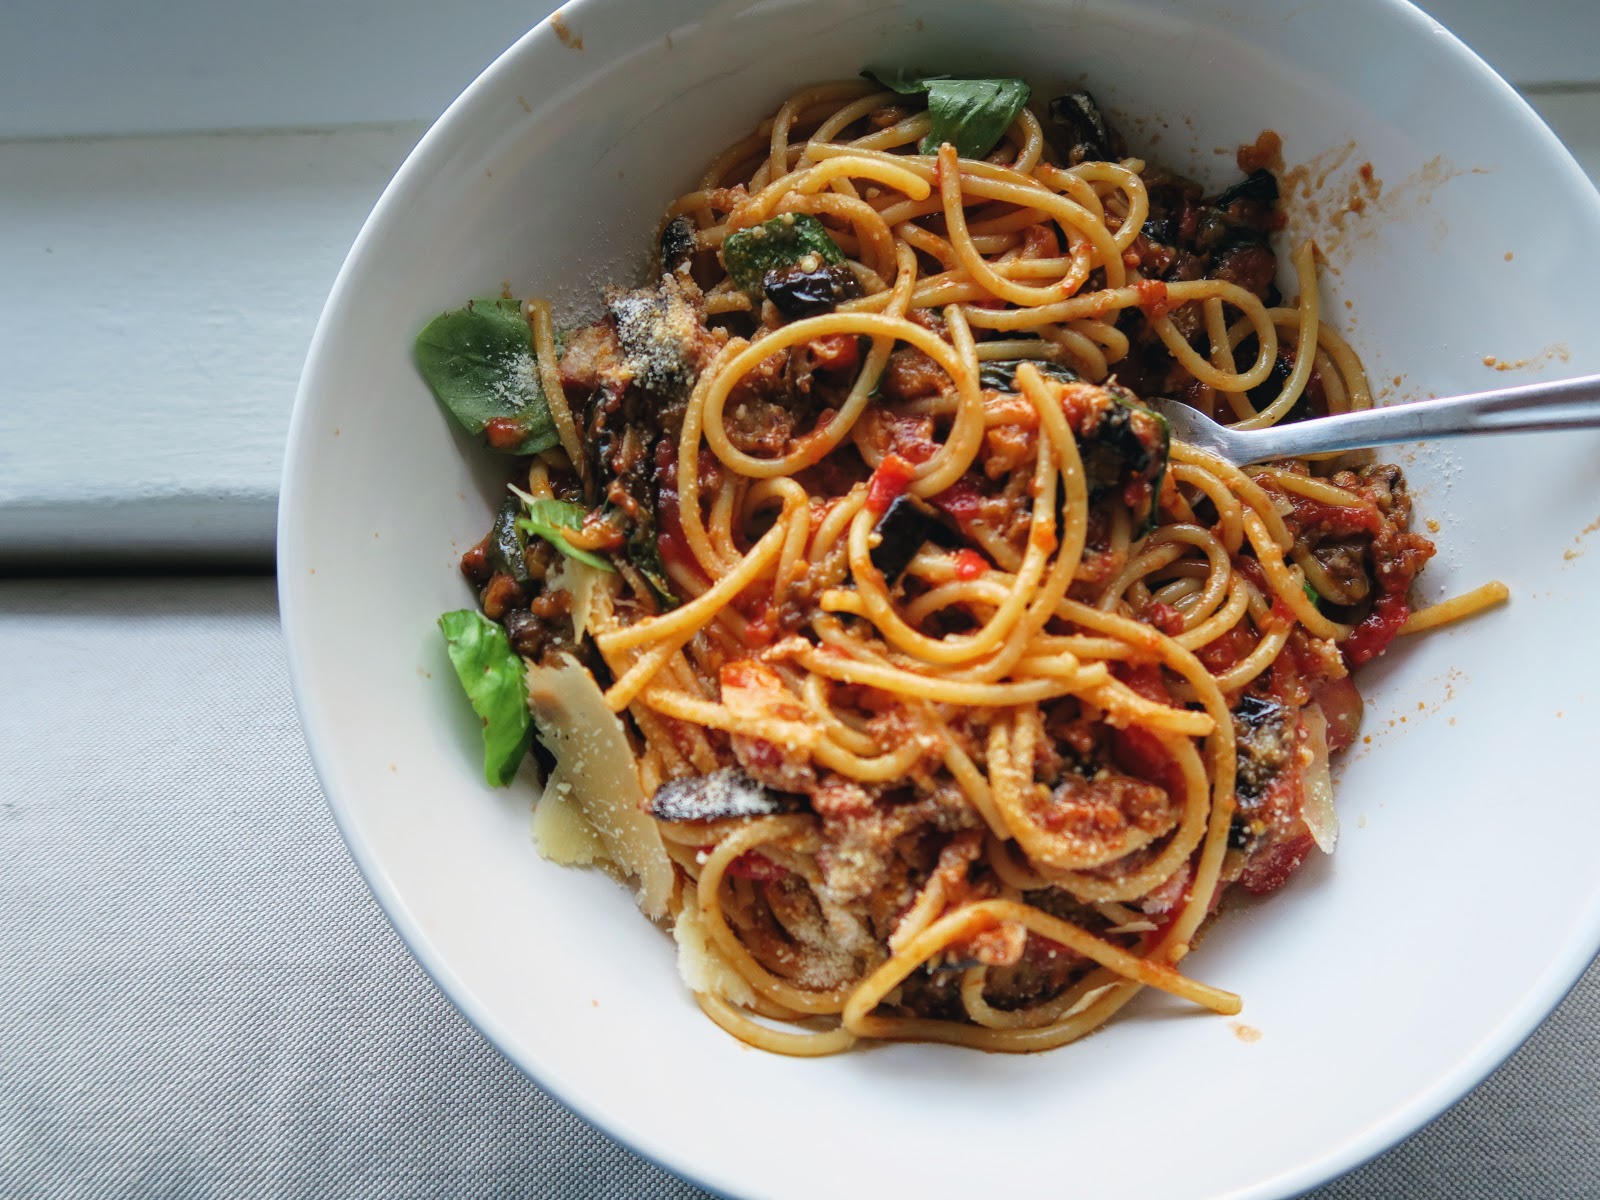 salt sugar & i: Pasta alla Norma from Simple by Yotam Ottolenghi